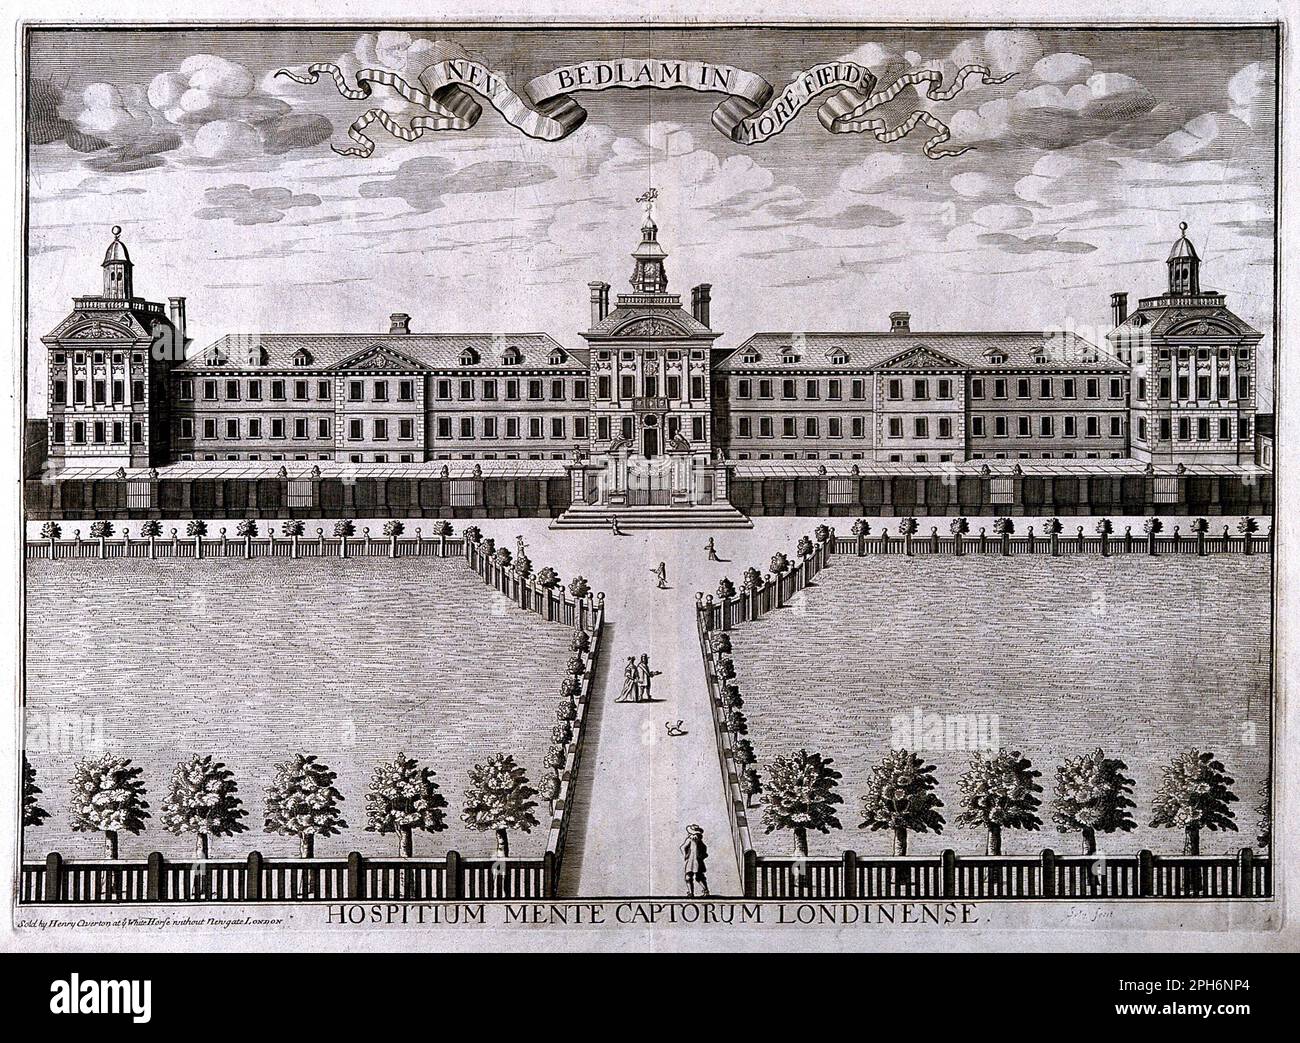 Bethlam Hospital, Moorfields, London, vintage engraving from c1700 Stock Photo